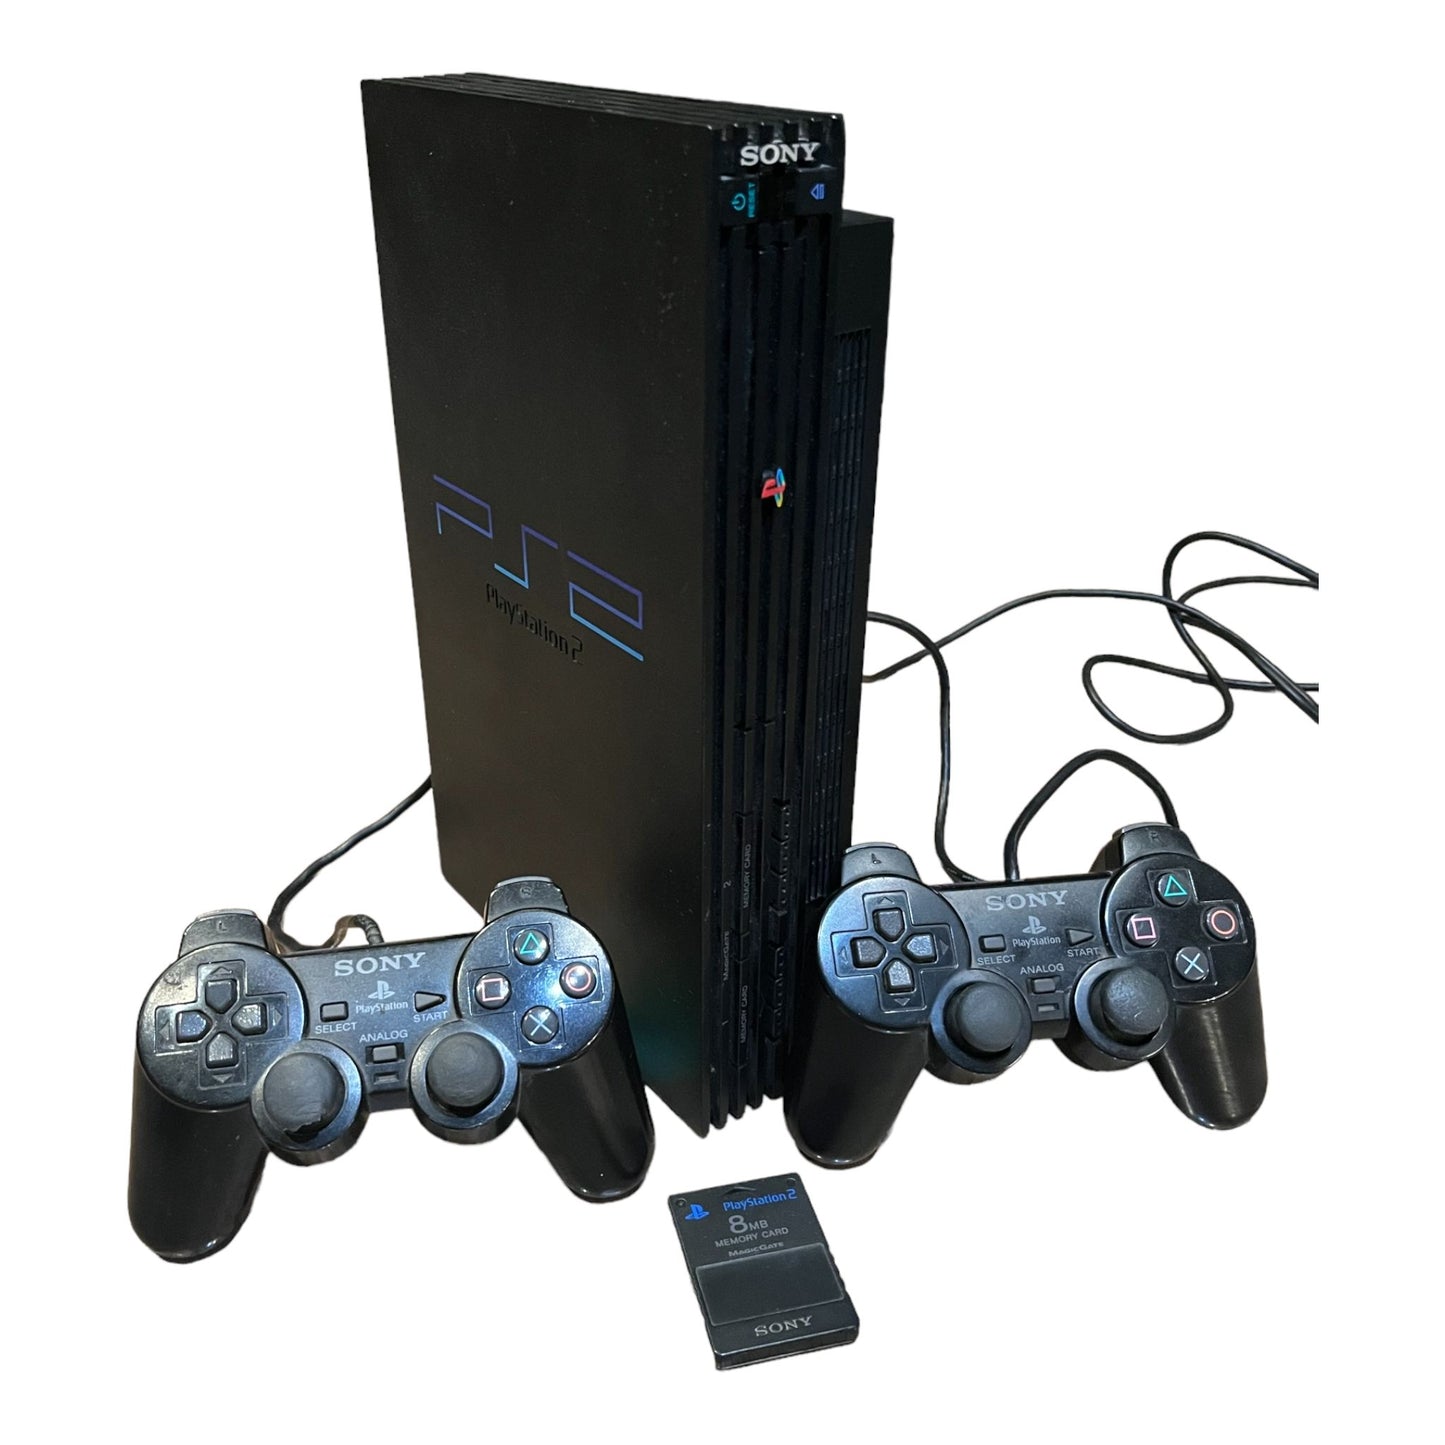 Playstation 2 Console Phat + 2 Controller's + Memory Card - PS2 - Black Set